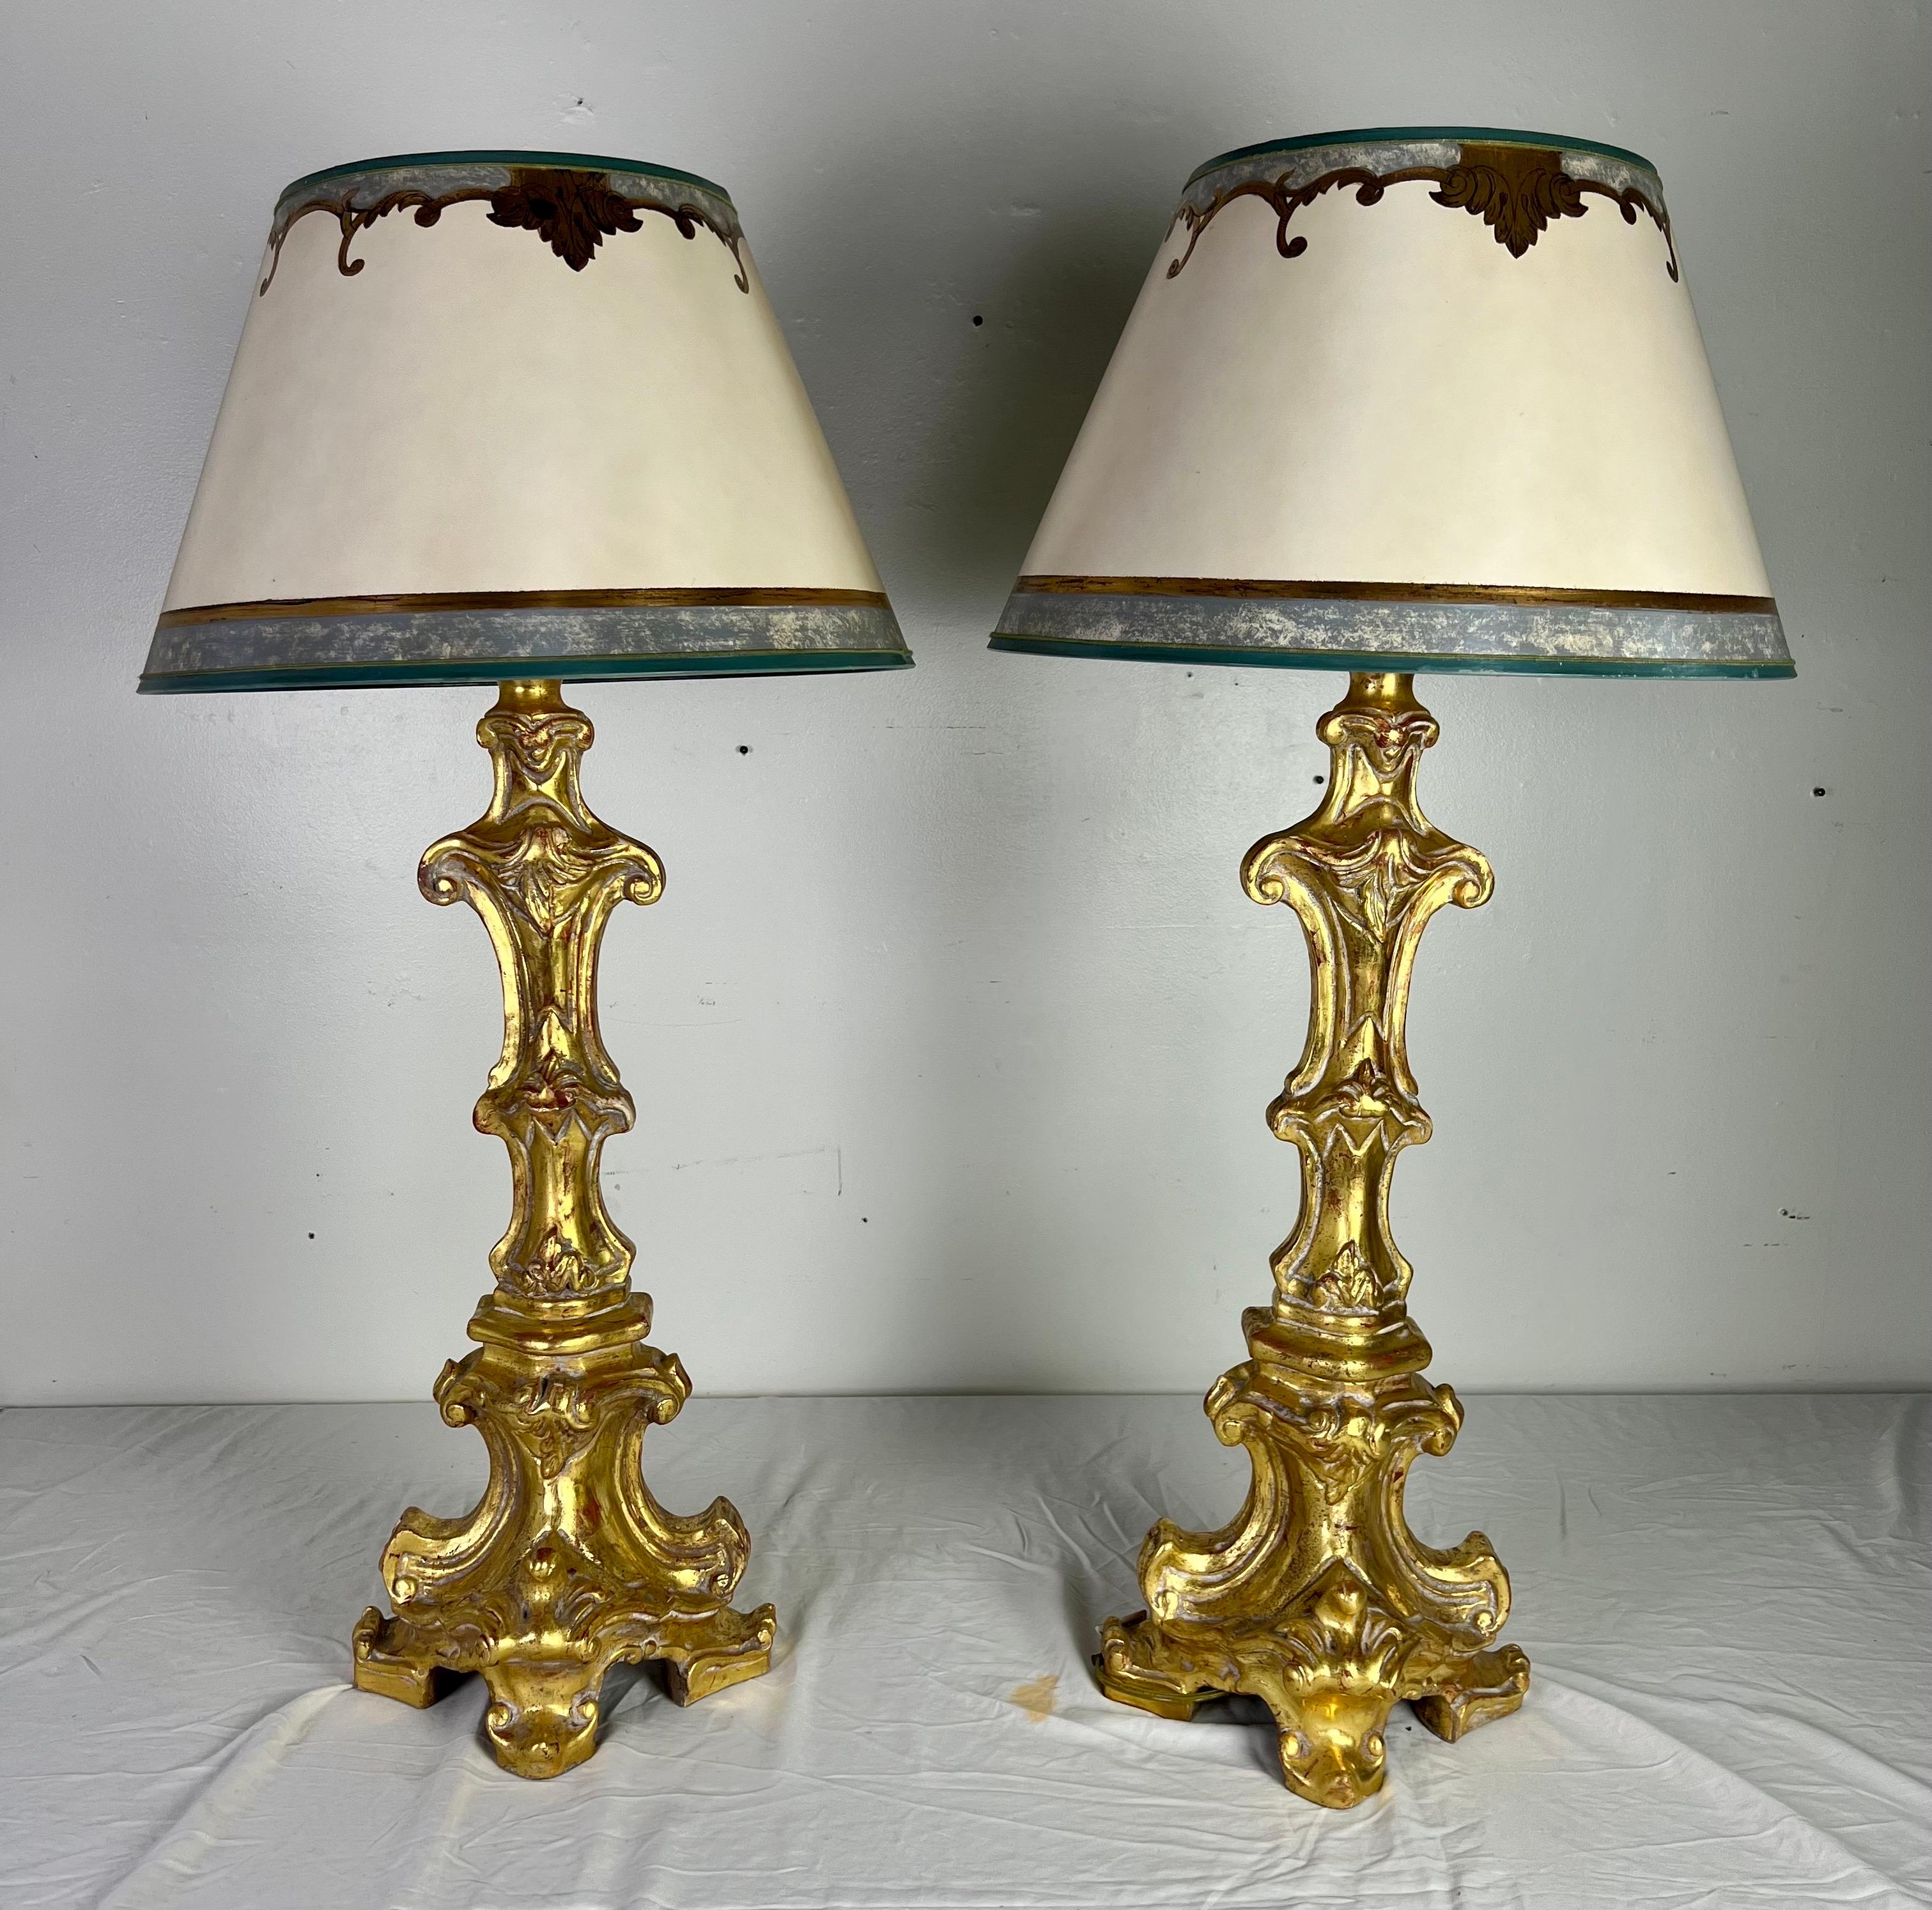 Pair of Italian giltwood candlestick lamps detailed with acanthus leaves and more...The lamps are crowned with hand painted parchment shades in colors of worn blue & gold.  The lamps are newly wired and ready to use.